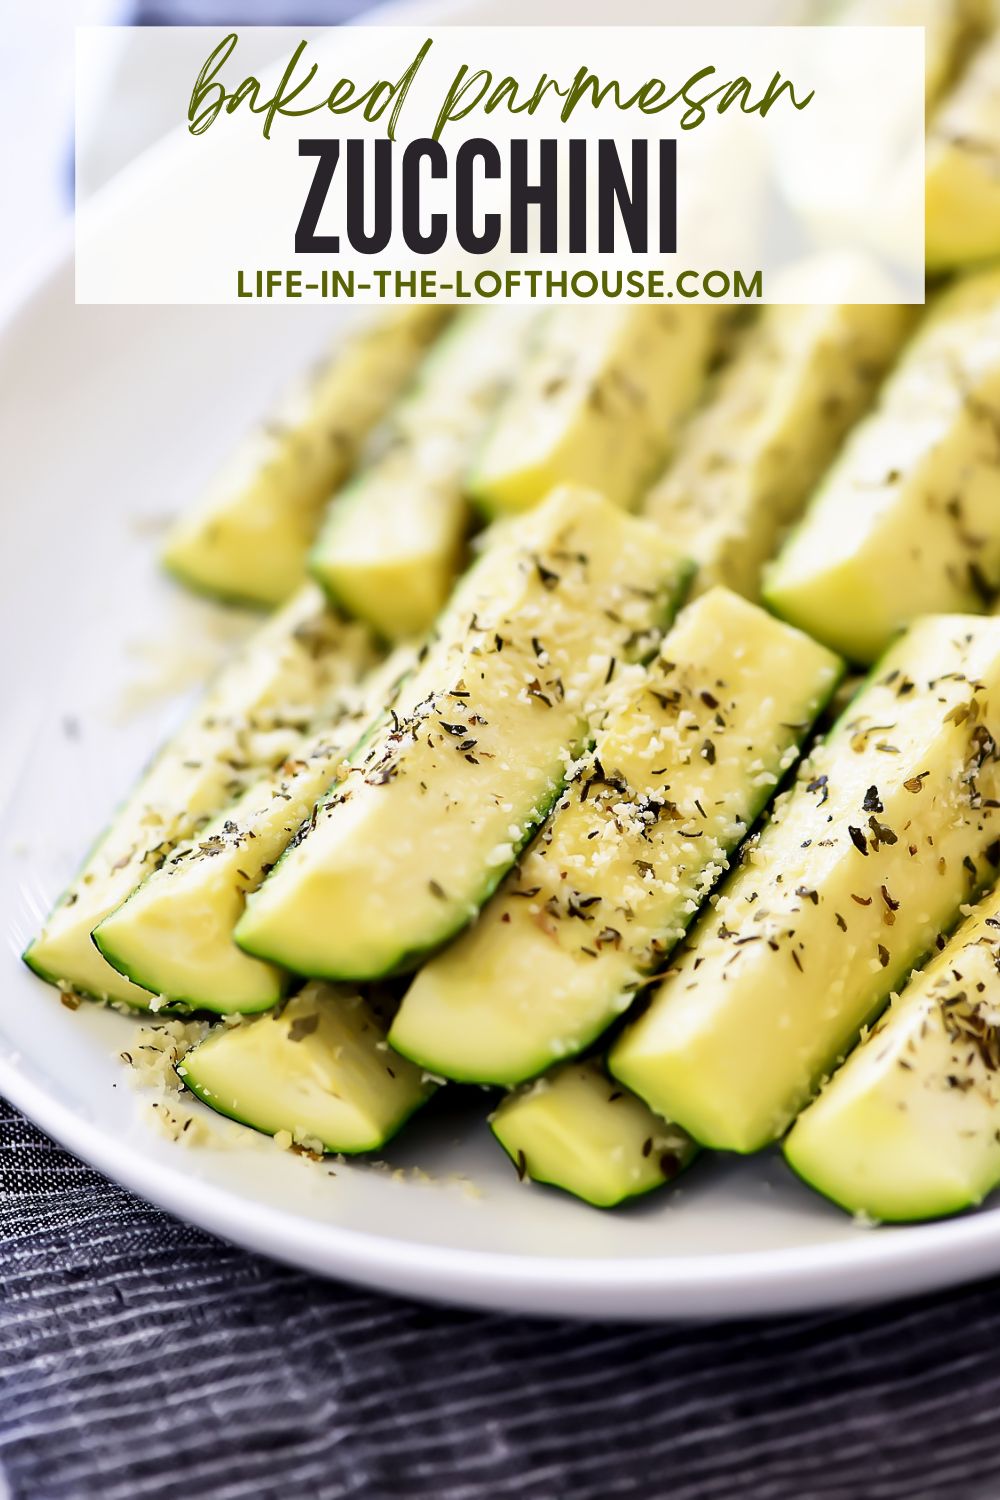 Baked zucchini covered in Parmesan cheese and full of Italian flavor. Life-in-the-Lofthouse.com